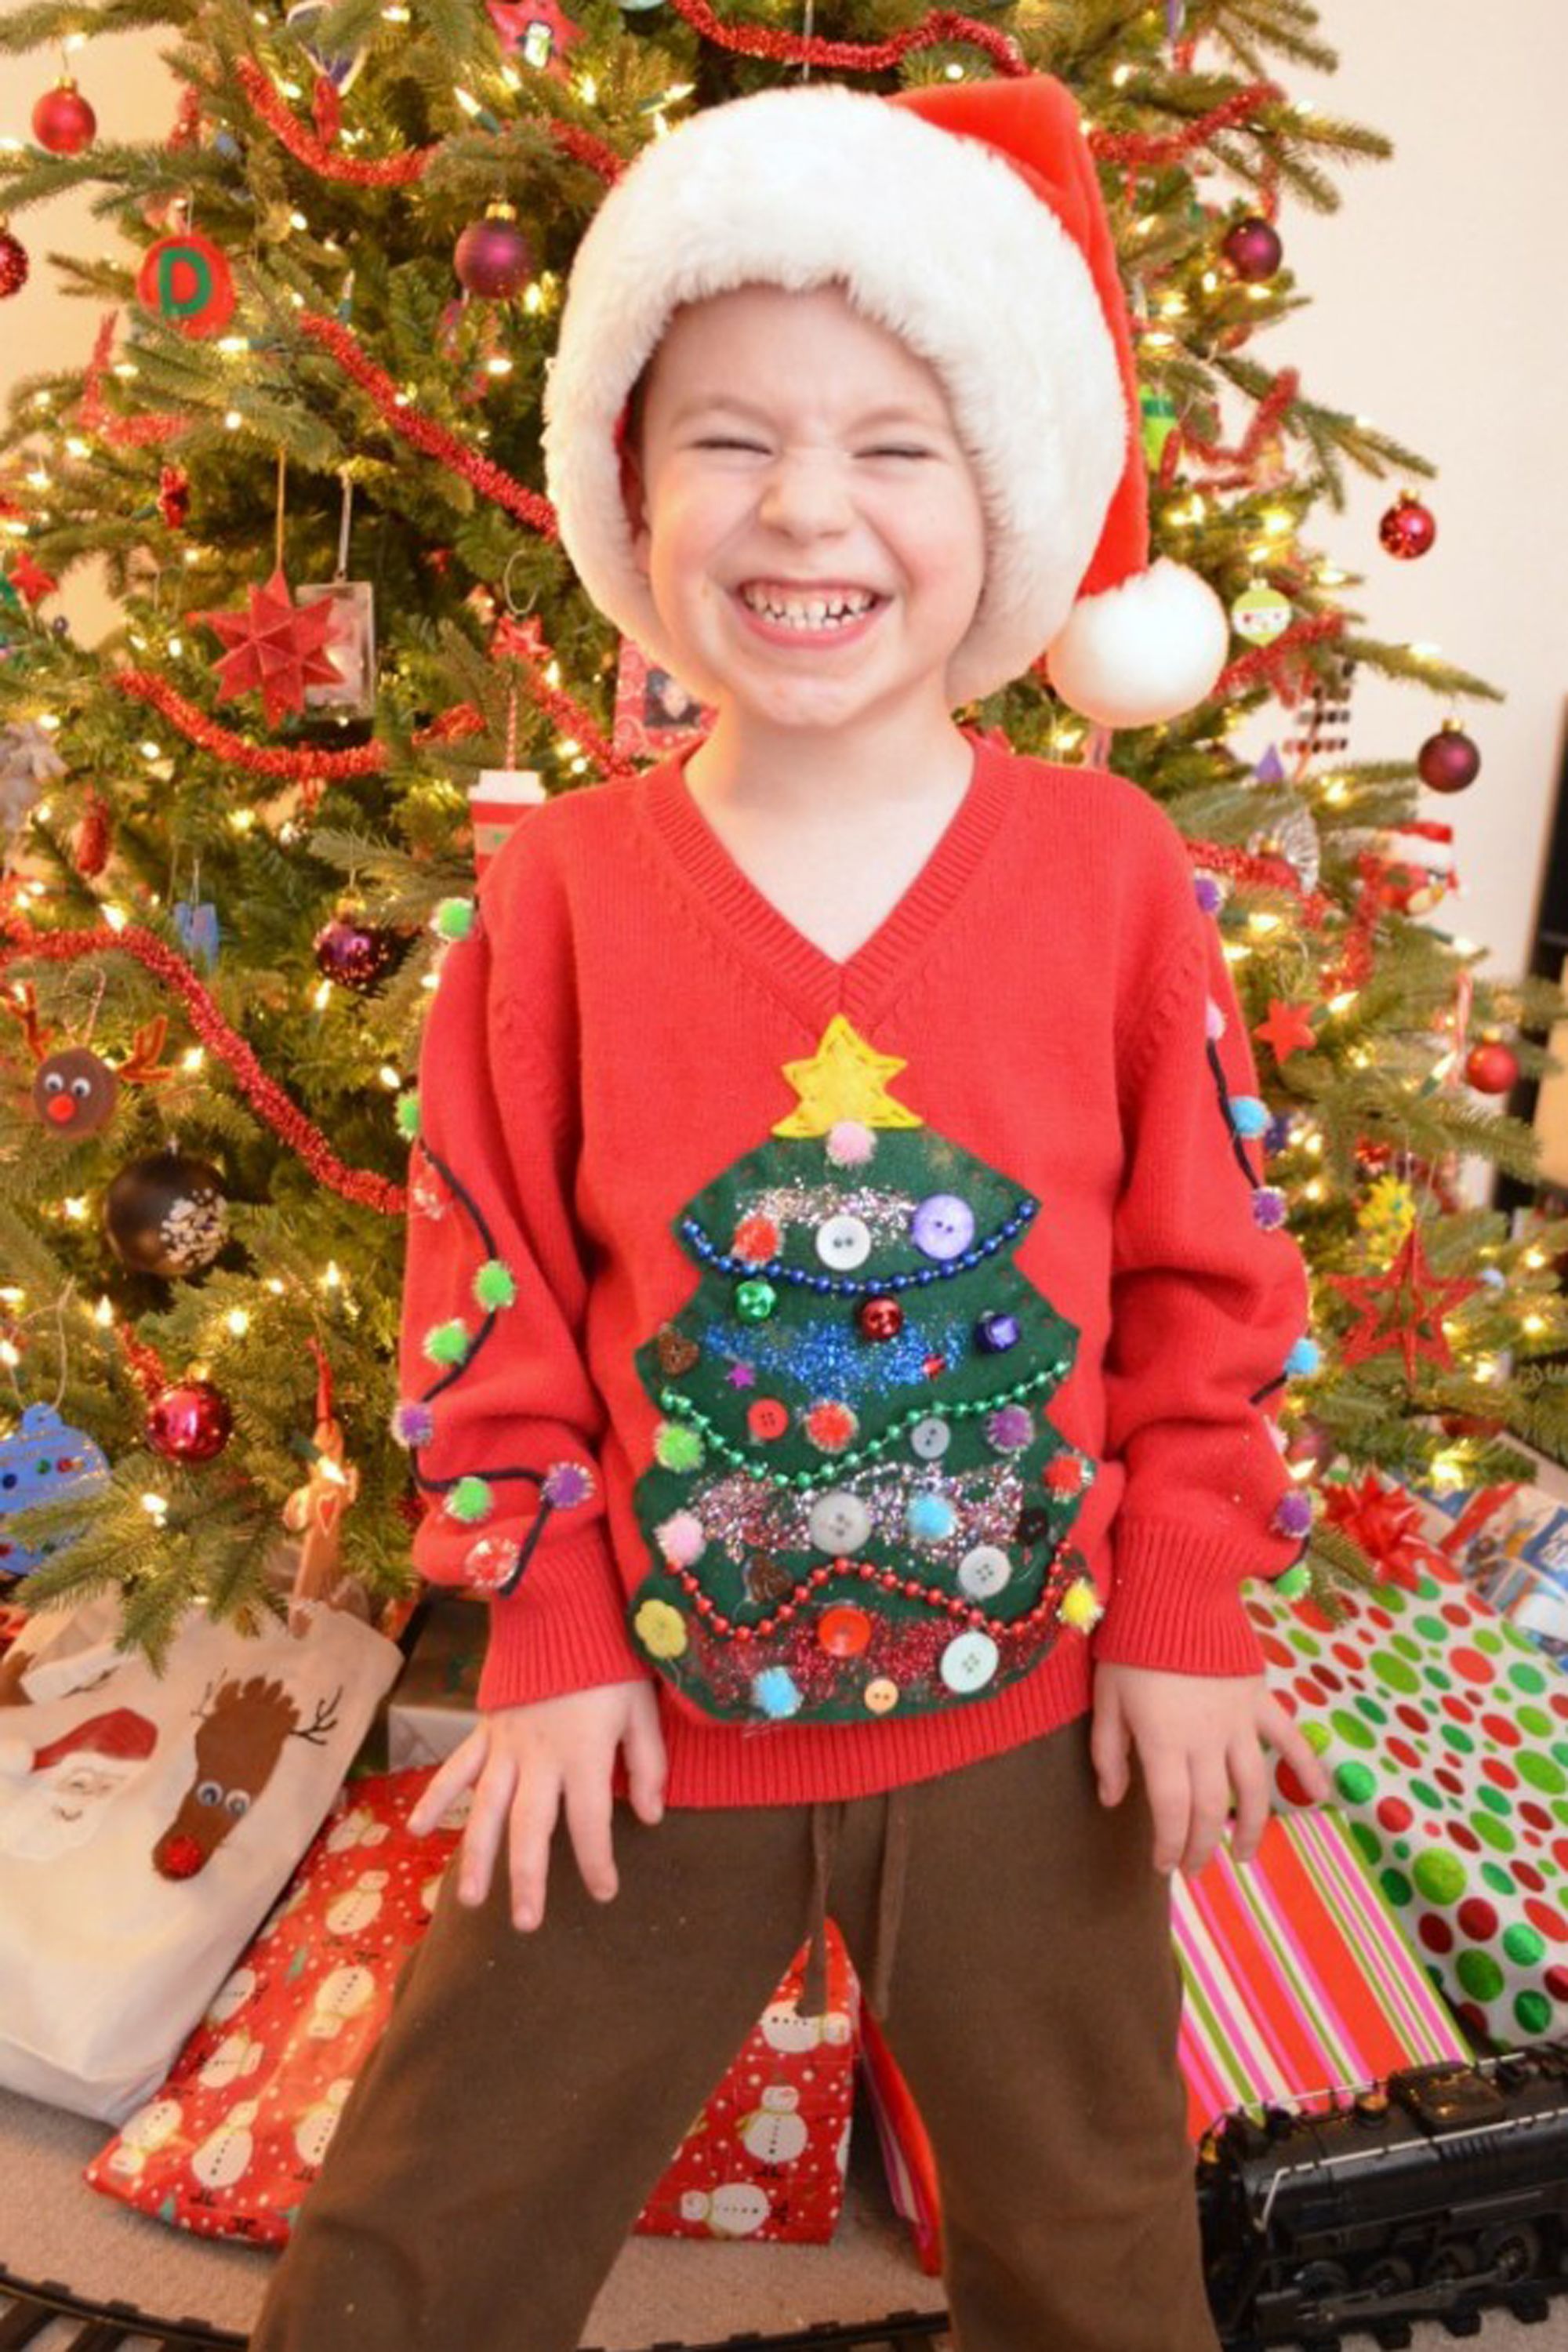 40 Ugly Christmas Sweater Ideas That You May Need This Holiday Season